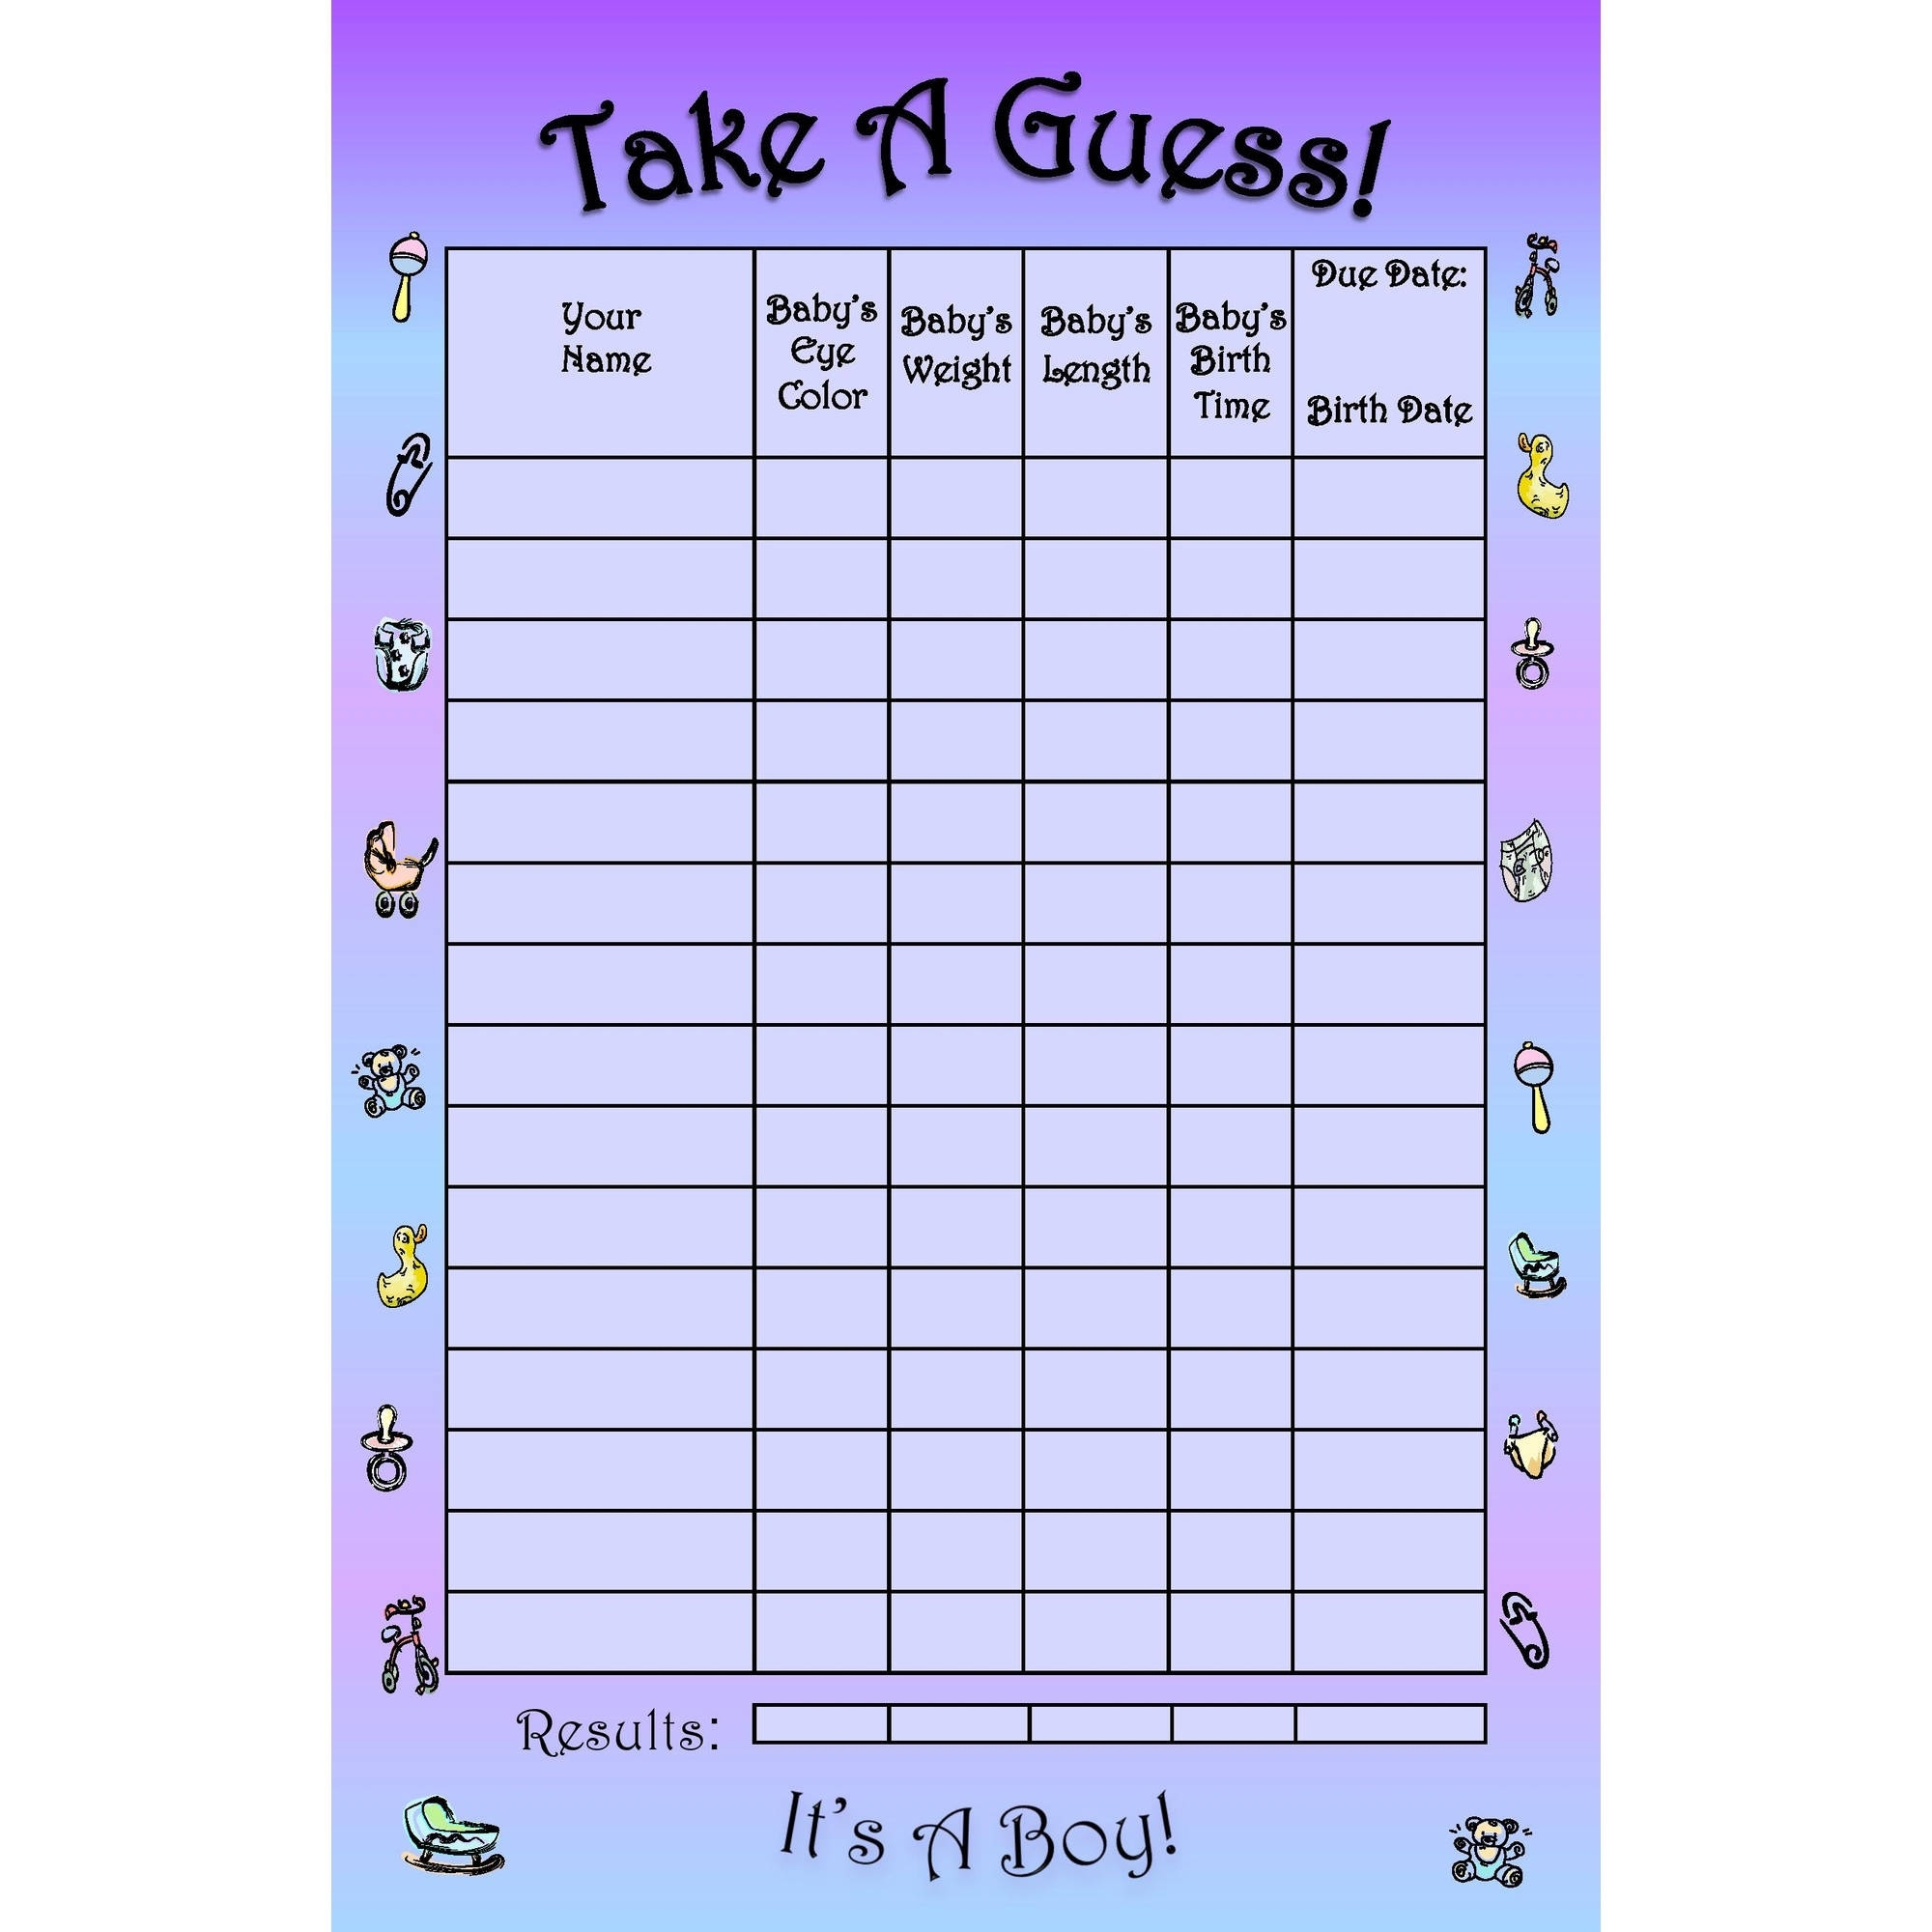 guess the baby weight and date template 16